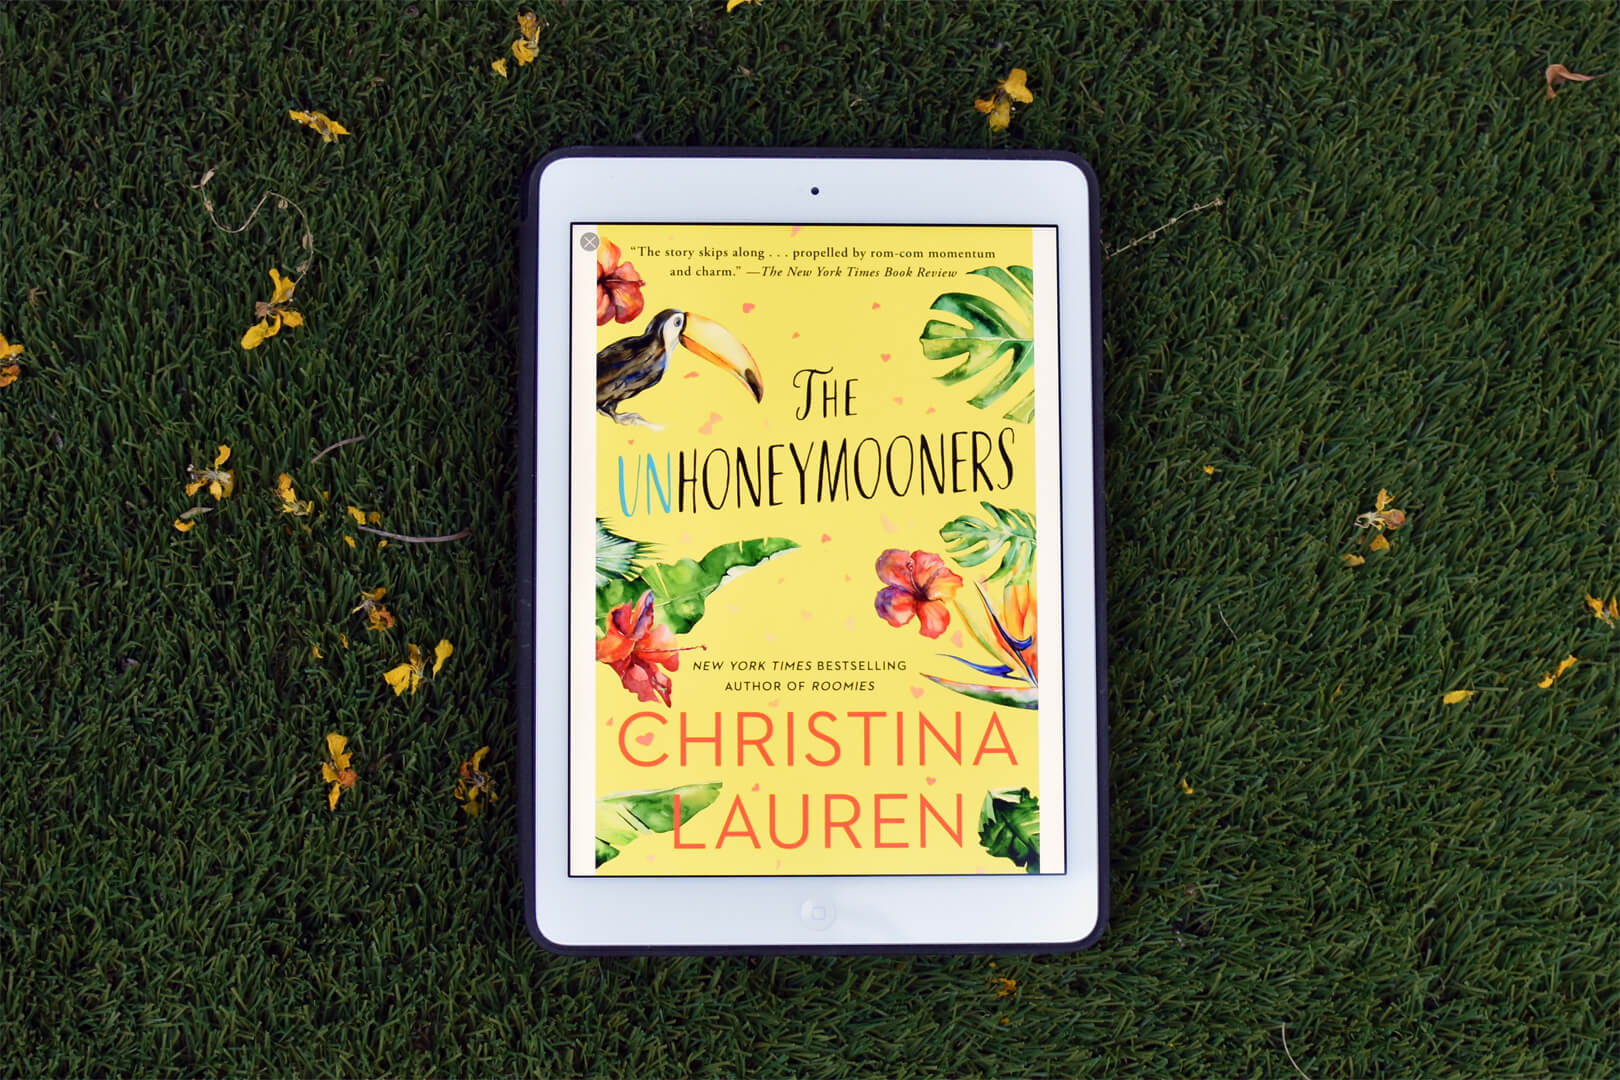 Book Club Questions for The Unhoneymooners by Christina Lauren